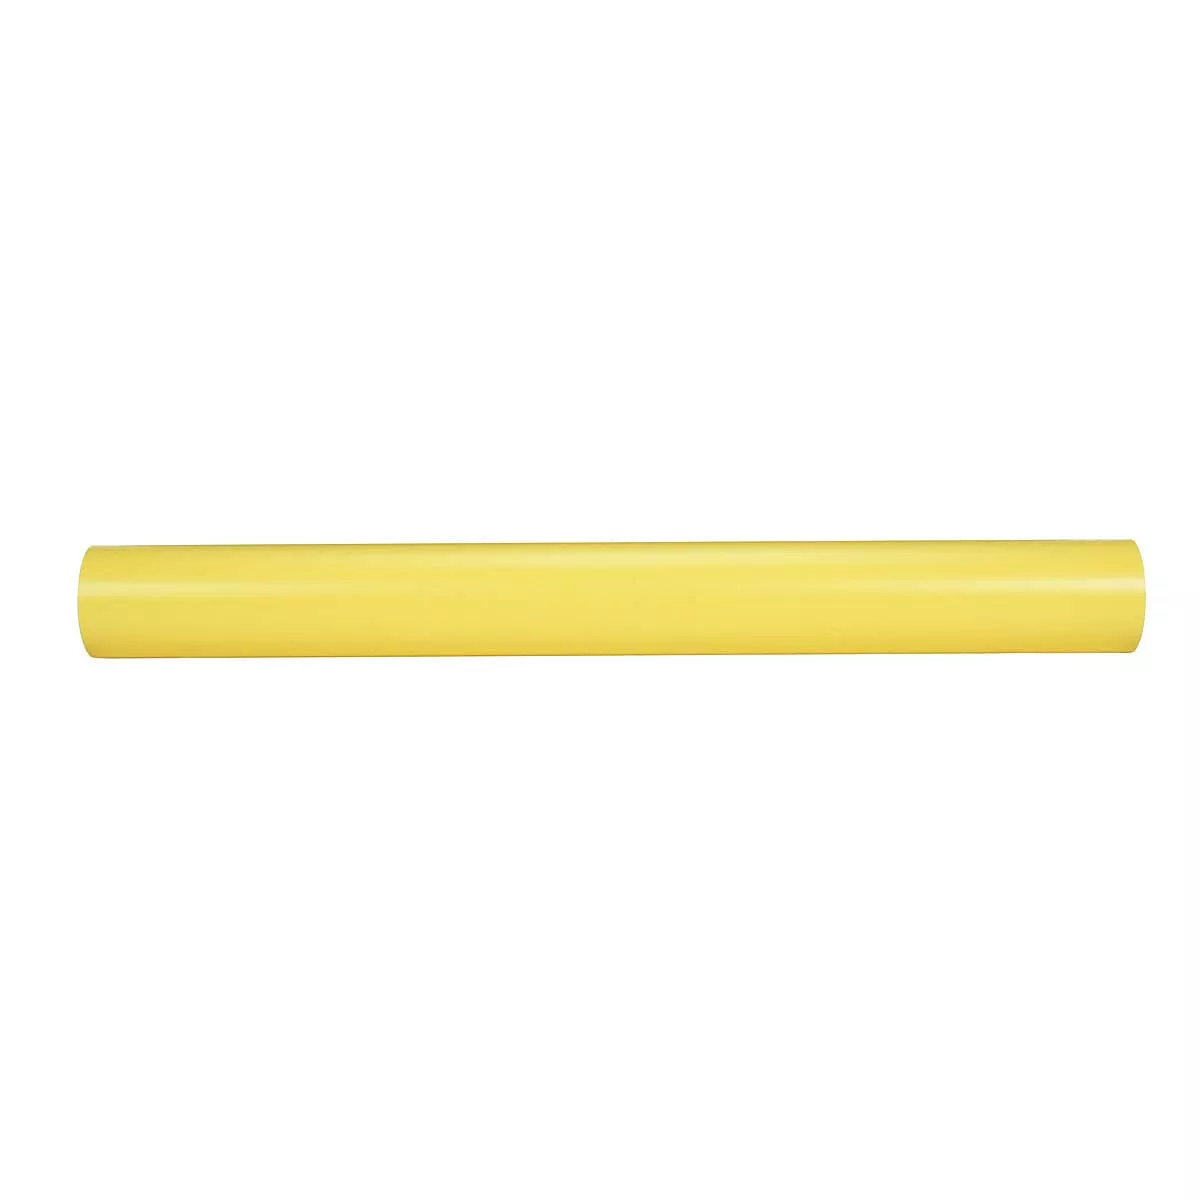 3M™ Cushion-Mount™ Plus Plate Mounting Tape E1315H, Yellow, 54 in x 25
yd, 15 mil, 1 Roll/Case